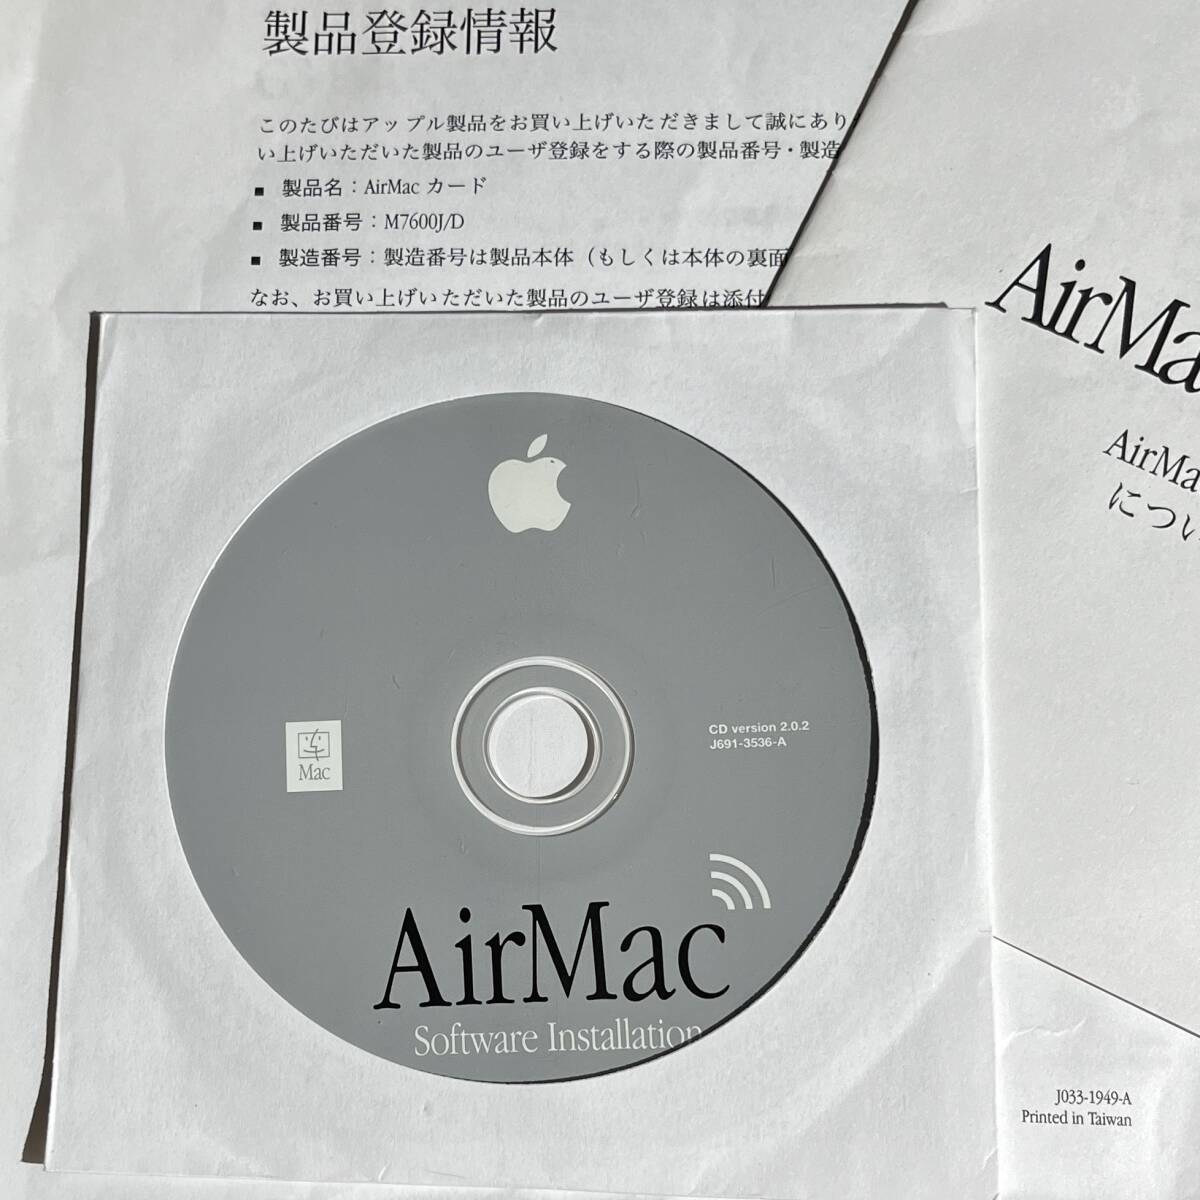 Apple Software Installation CD: AirMac 2002 Version 2.0.2 & AirMac Extreme 2004 Version 3.4：付属説明書付き_AirMac (Ver. 2.0.2)